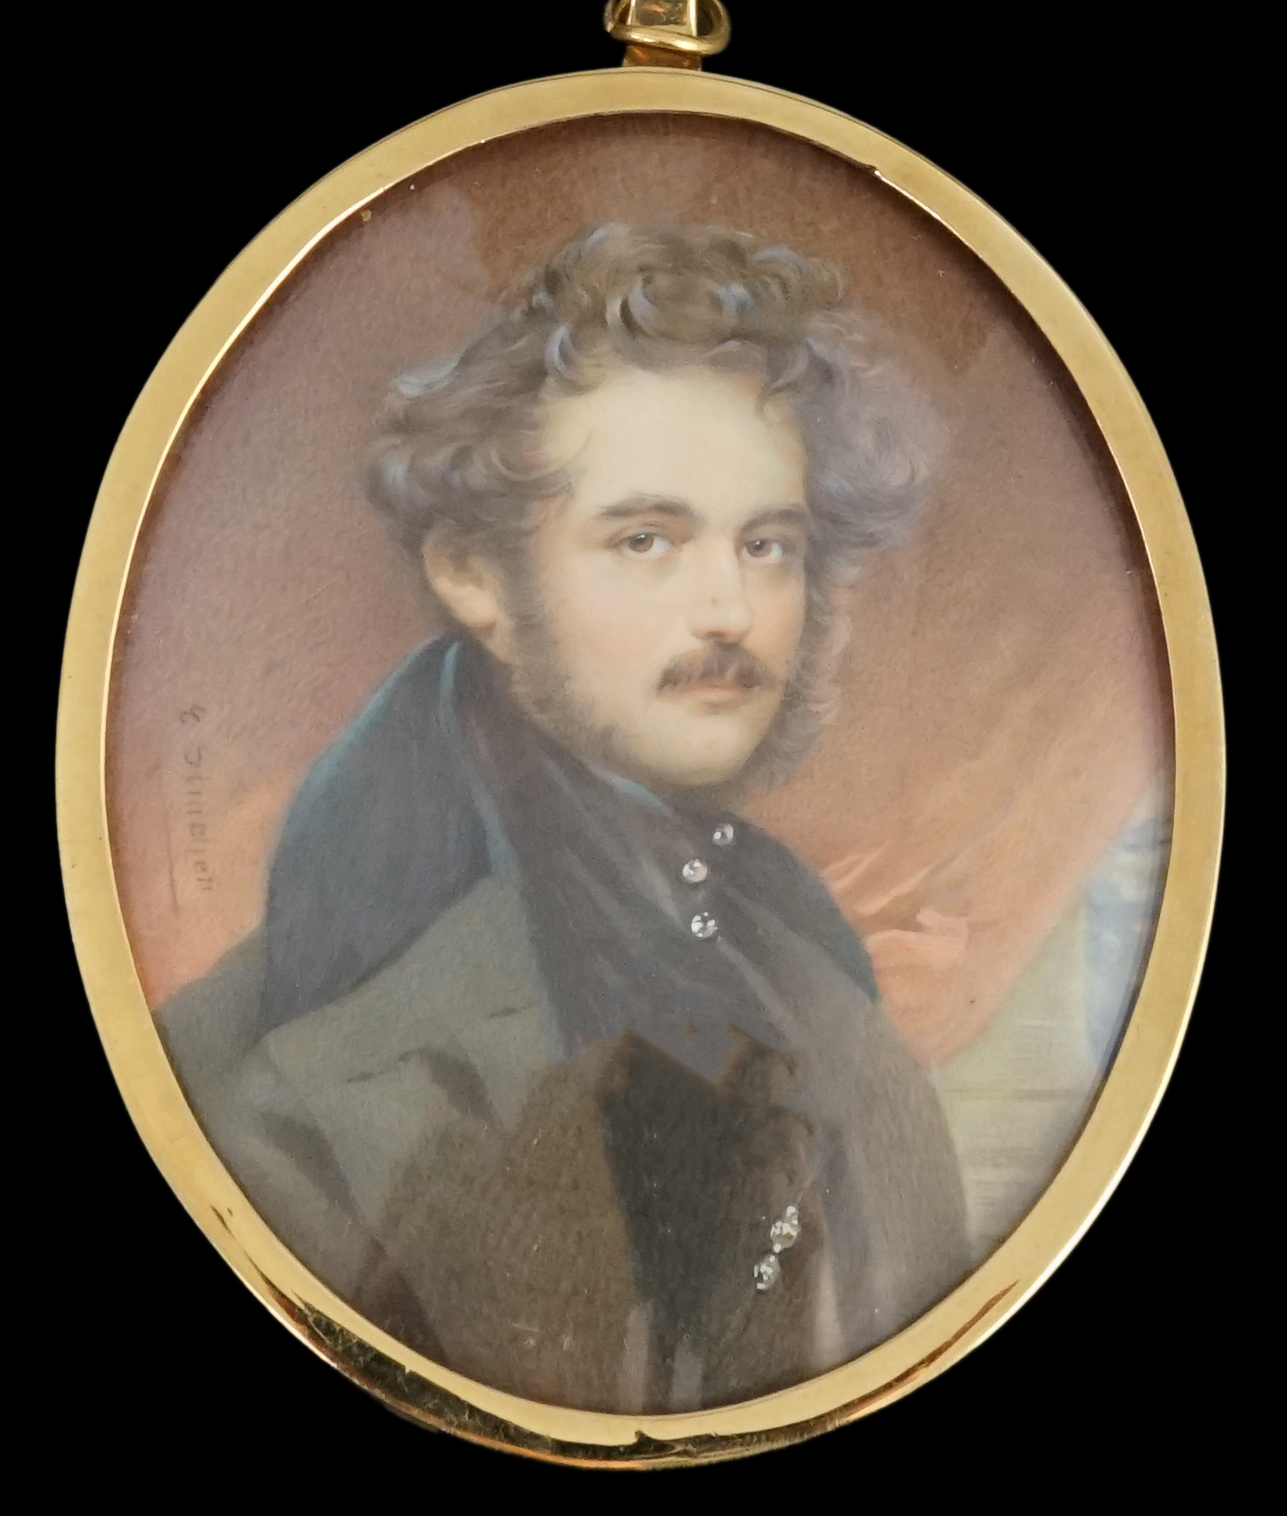 E. Scindler (19th C.), Portrait miniature of a bearded gentleman, watercolour on ivory, 8.2 x 6.8cm. CITES Submission reference 81QBHEBP